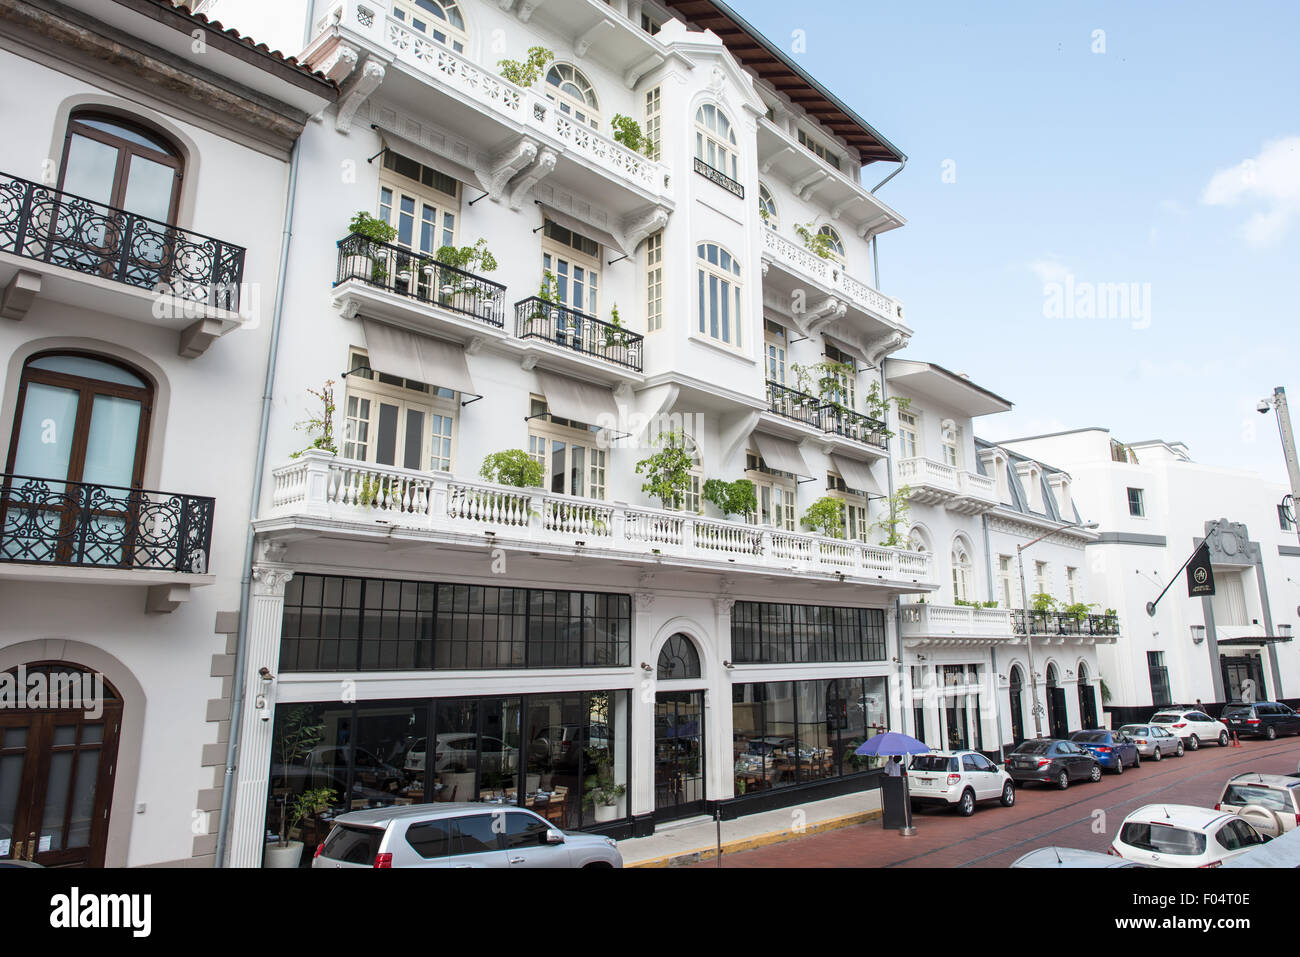 PANAMA CITY, Panama--The American Trade Hotel is a boutique luxury hotel in the heart of the historic Casco Viejo neighborgood of Panama City. Stock Photo